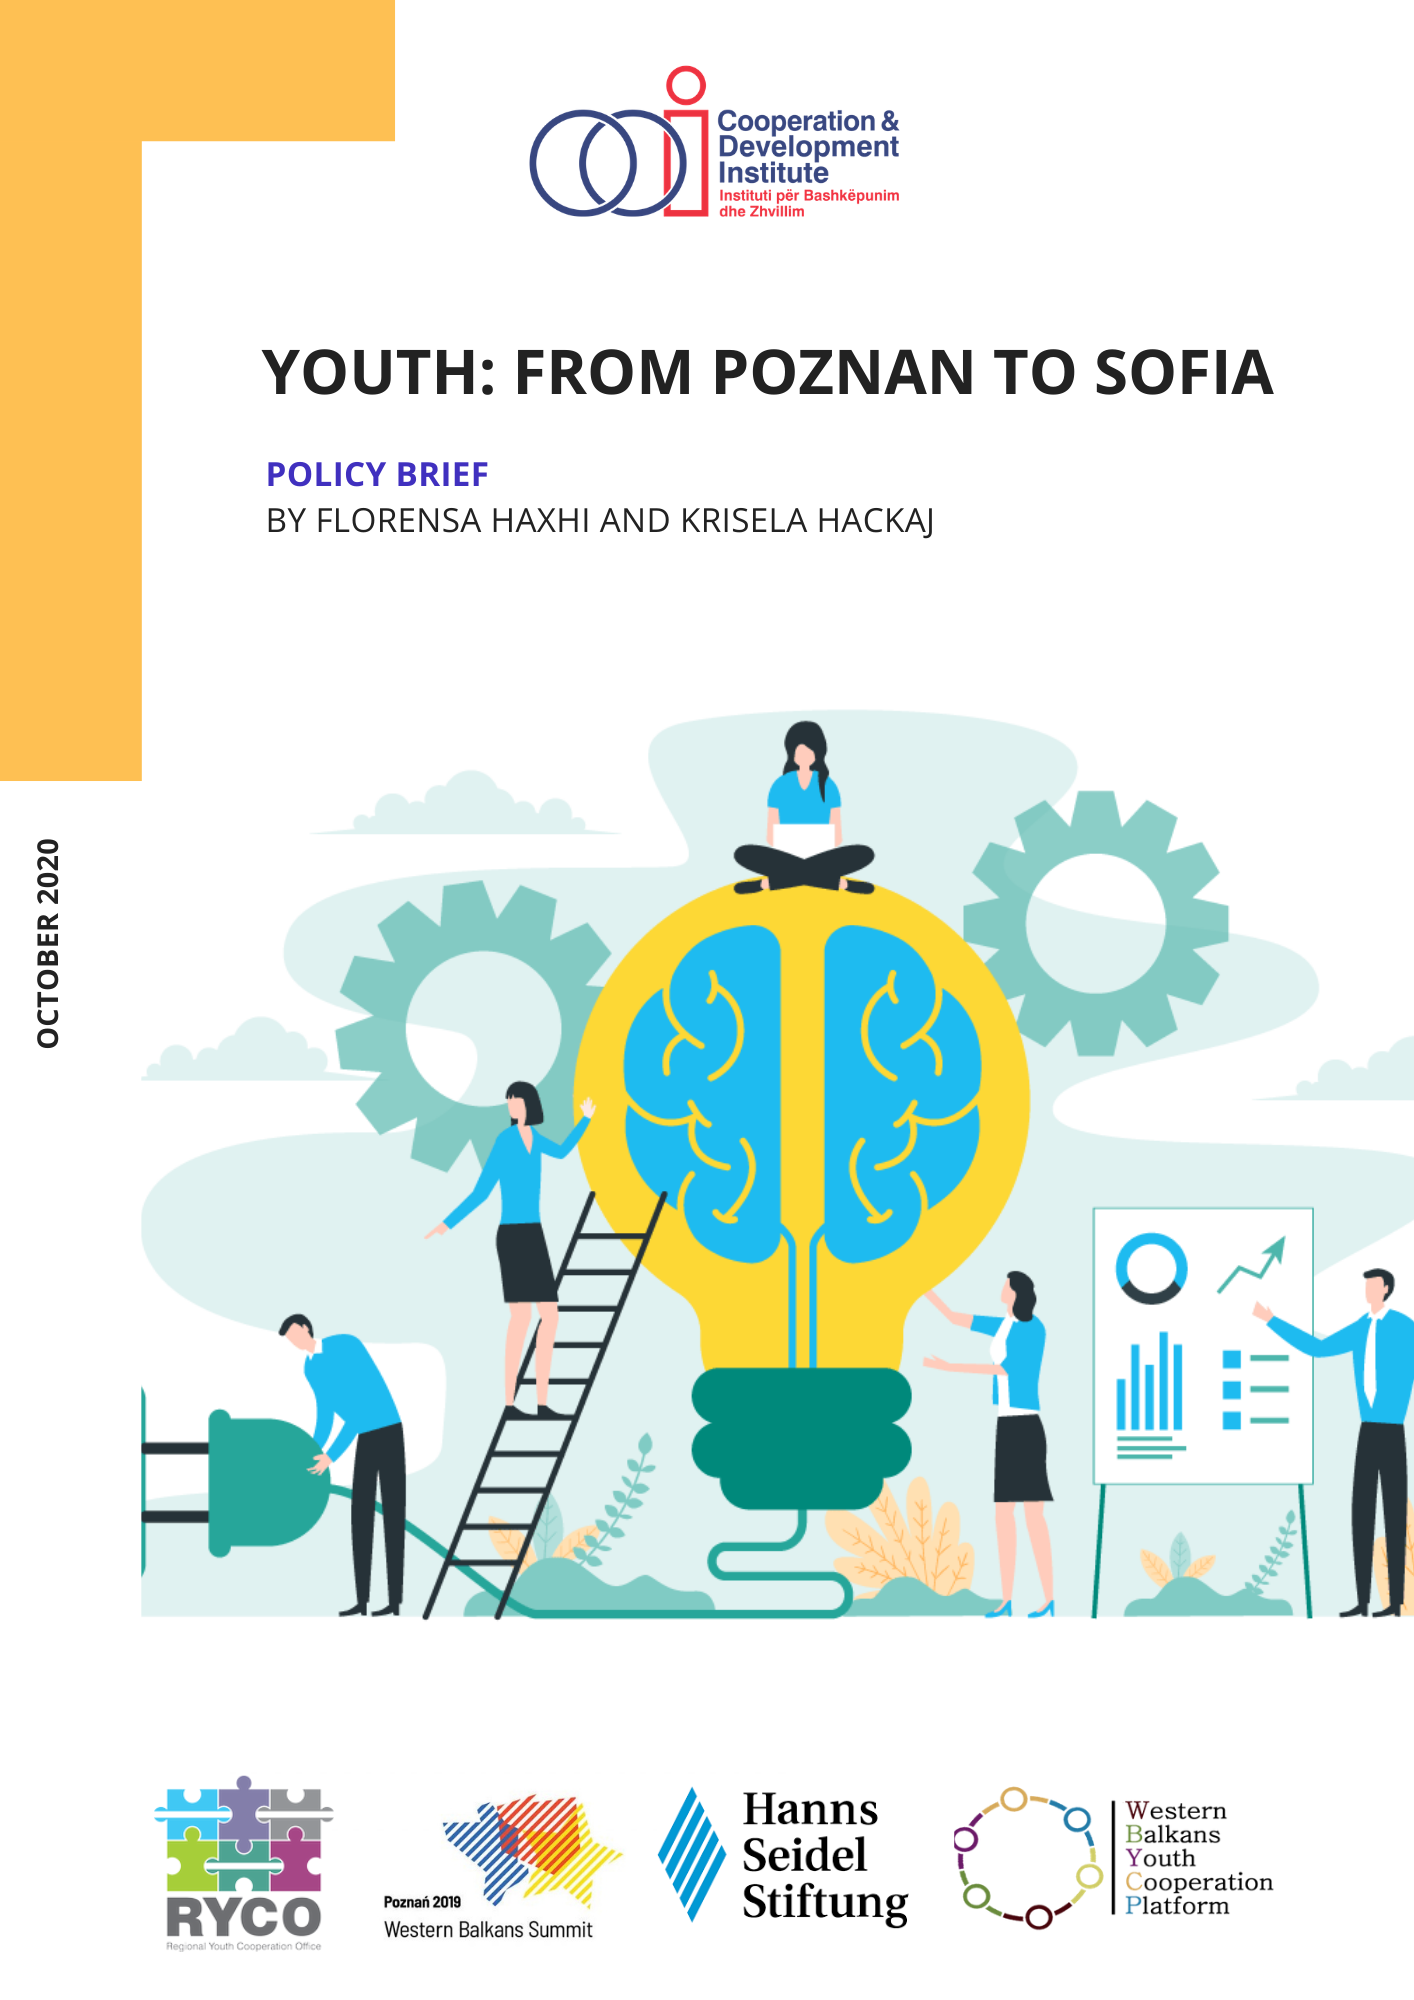 YOUTH: FROM POZNAN TO SOFIA